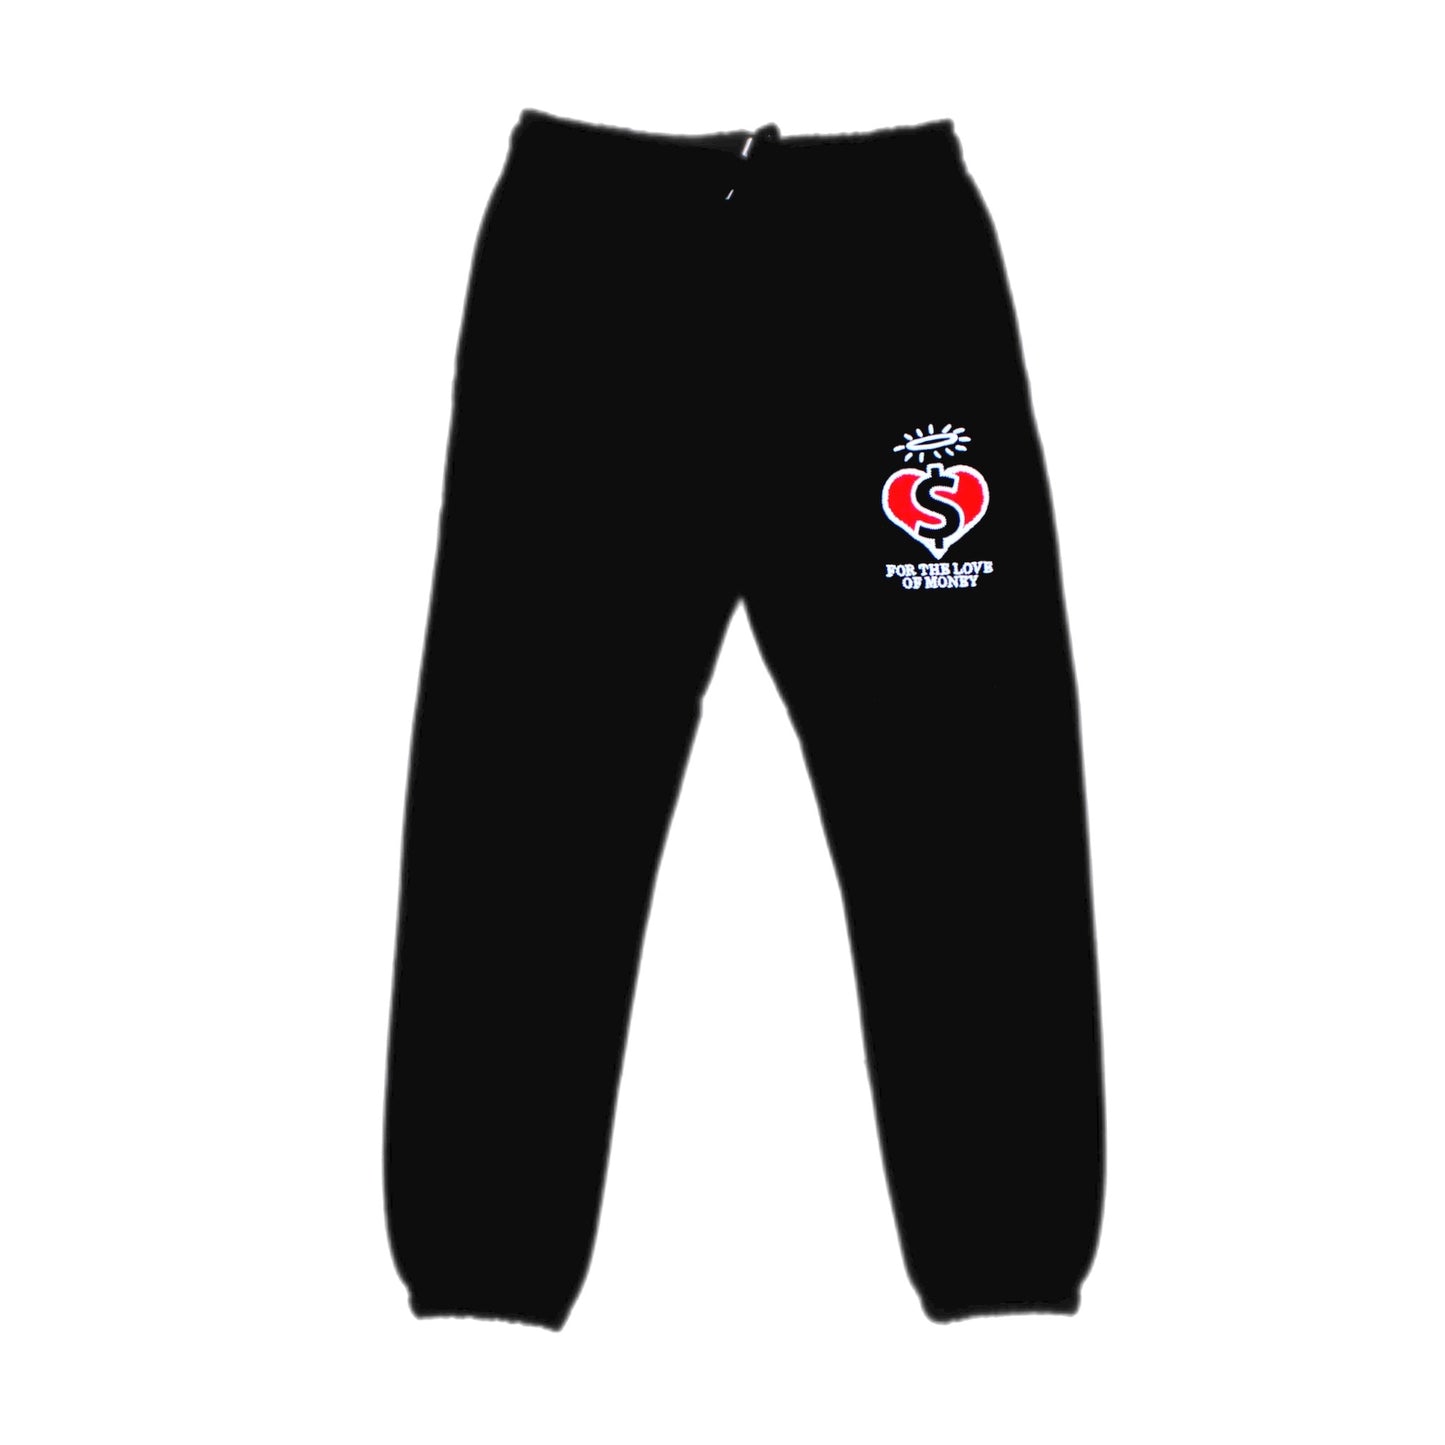 EVOL For The Love Of Money Sweatpants Black/Red